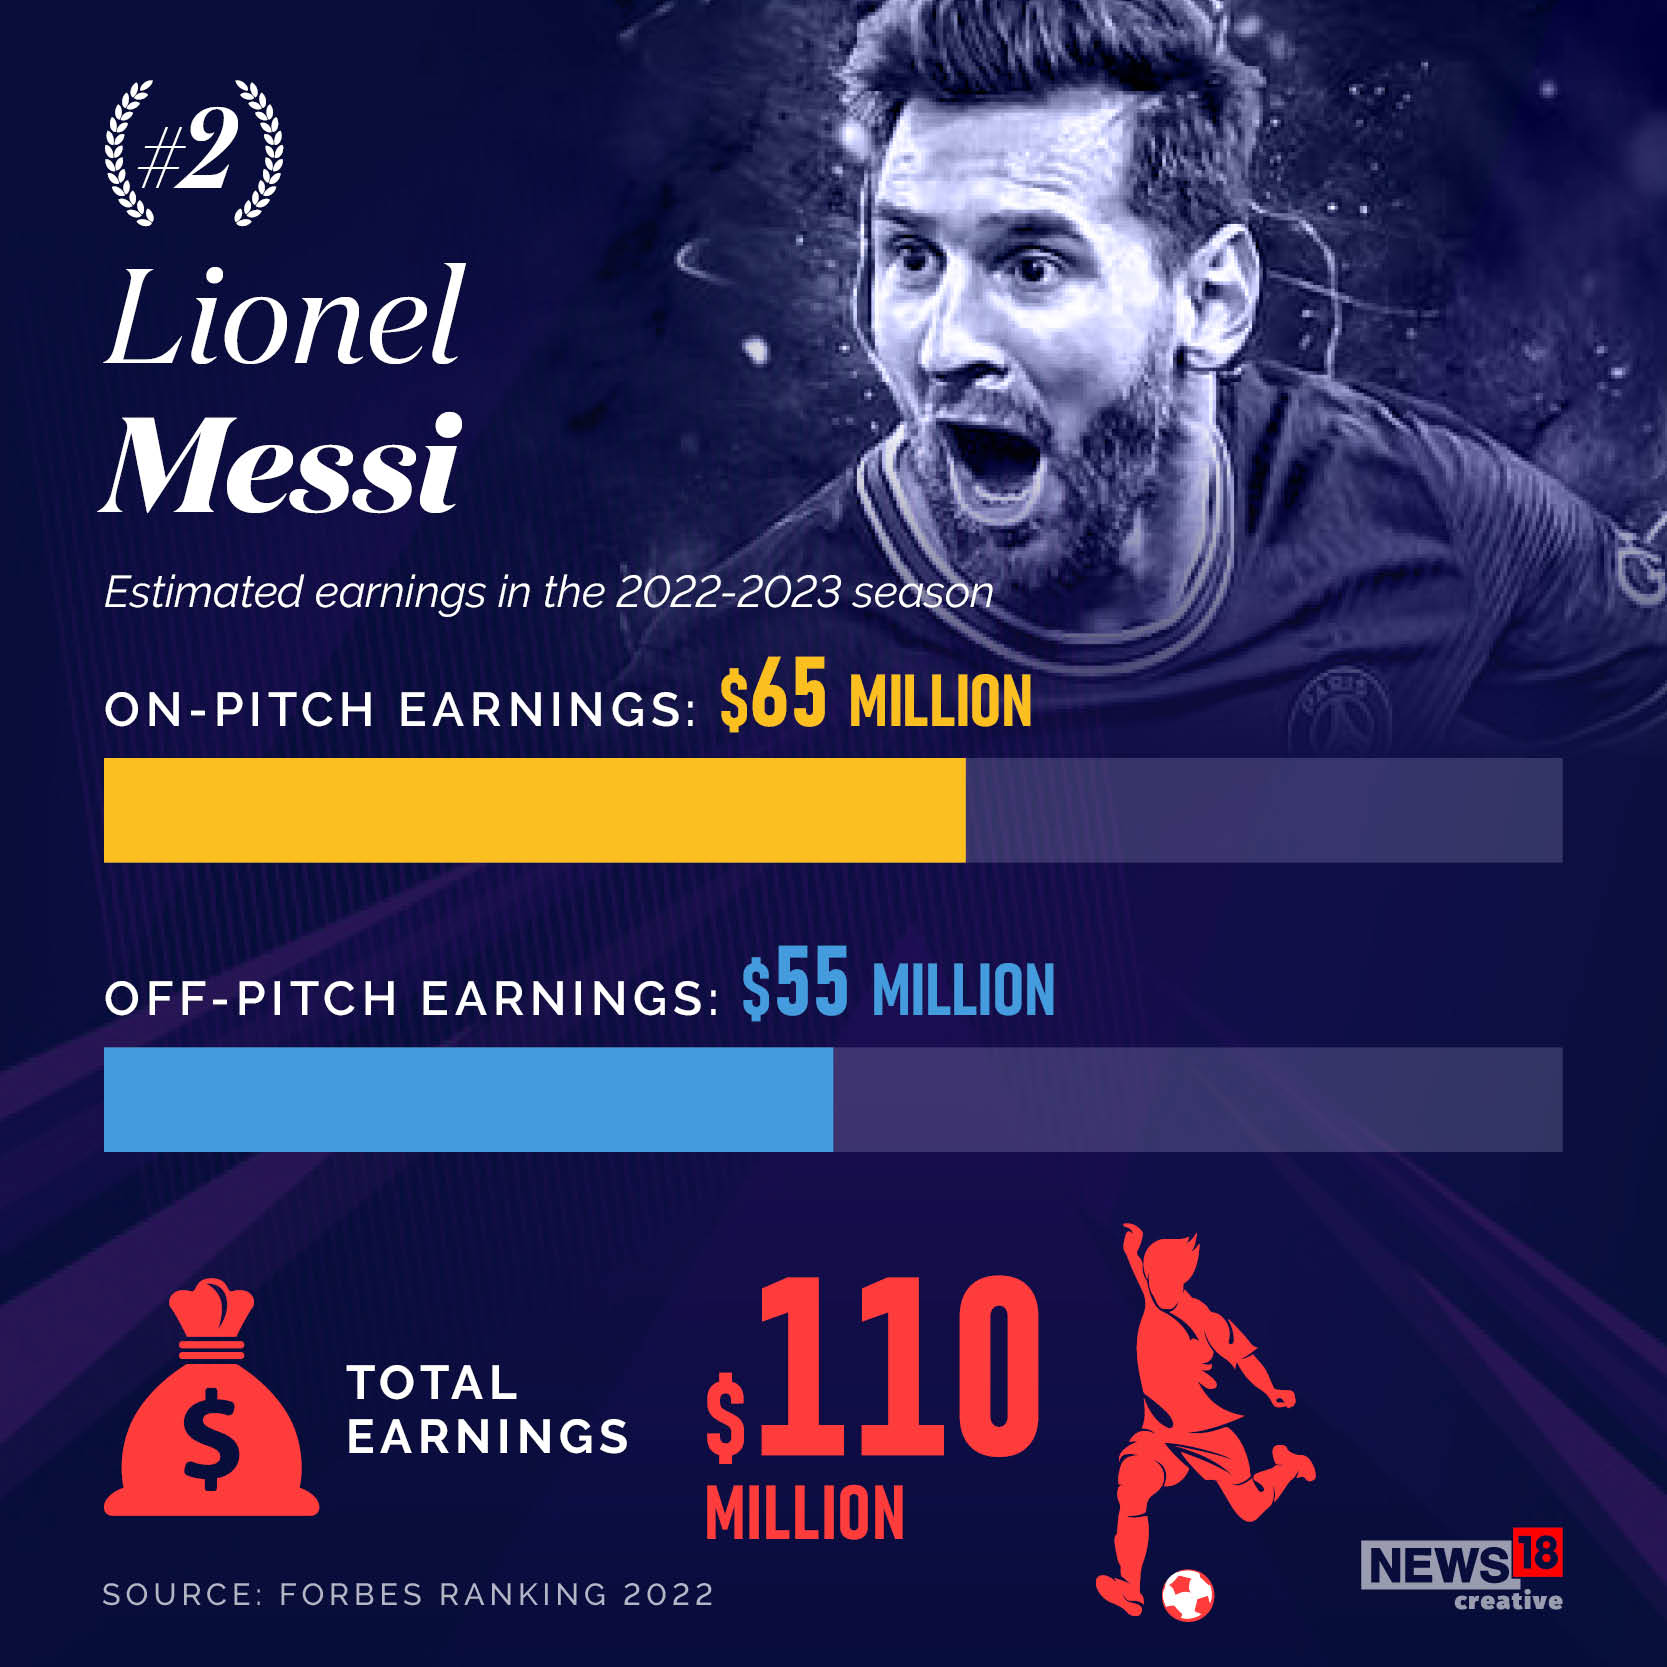 Lionel Messi: One of football's top earners at $110 million